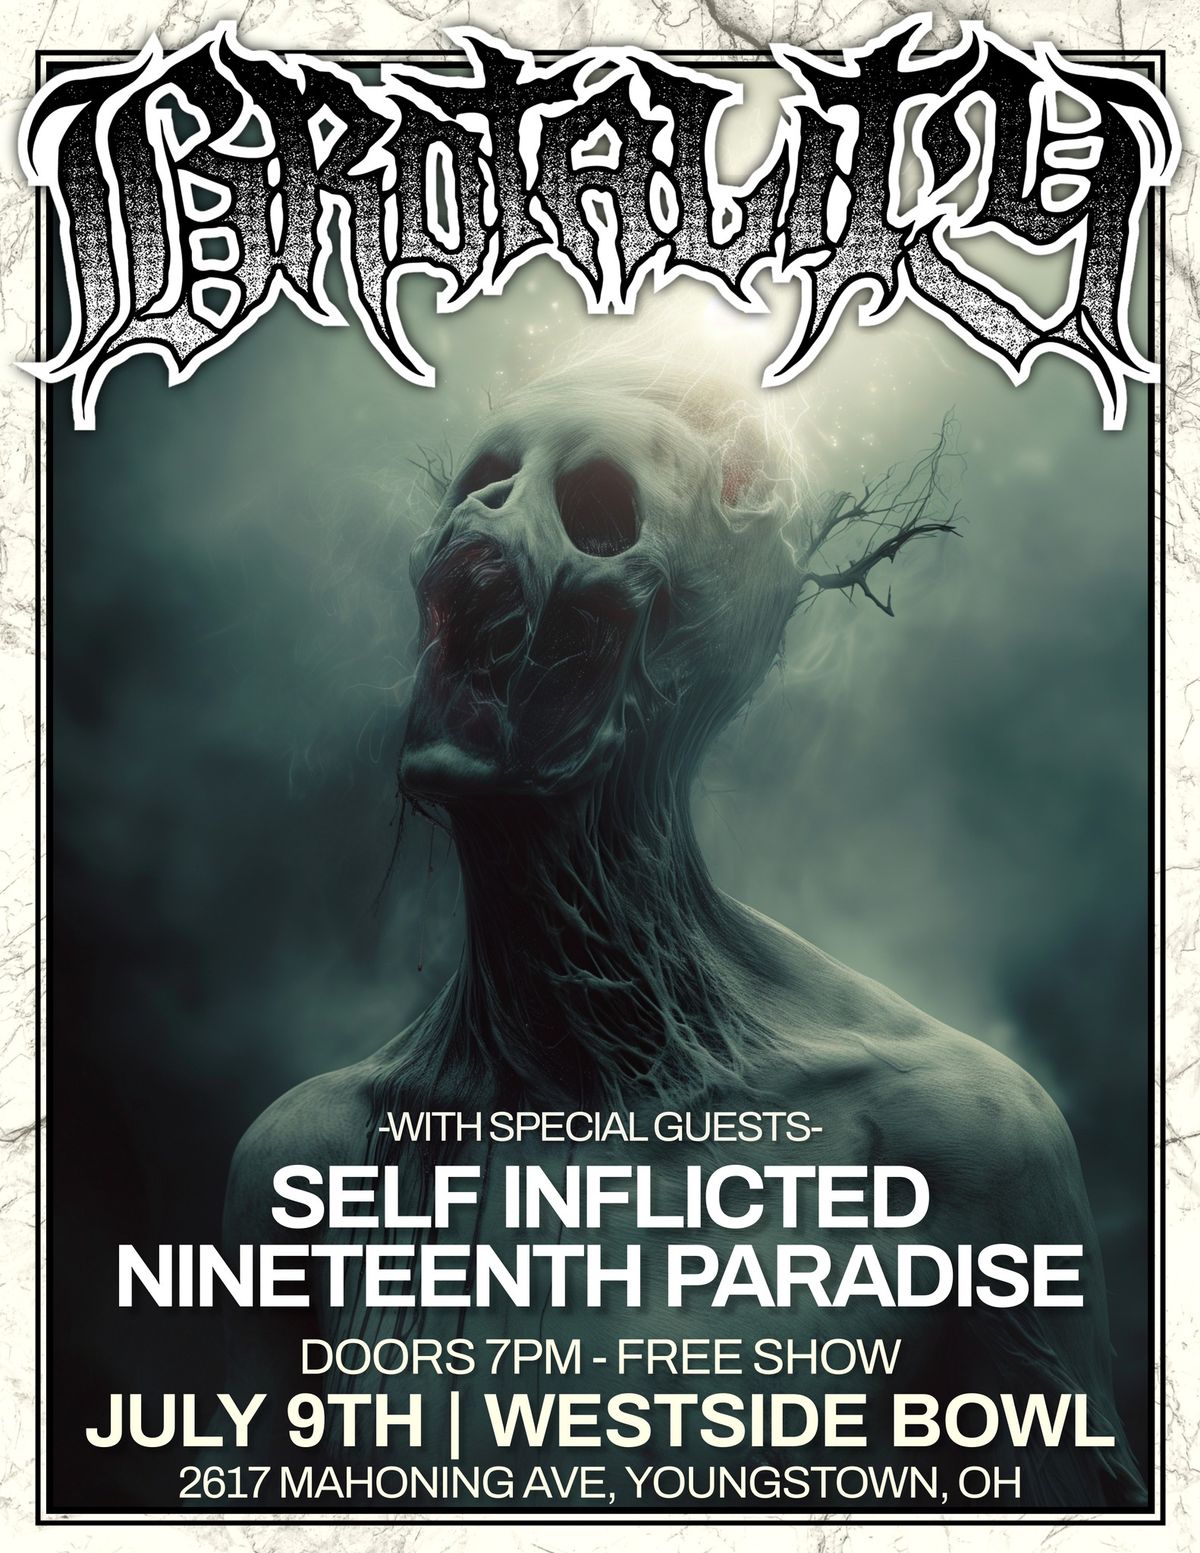 Brotality\/Self Inflicted\/Nineteenth Paradise at the Westside Bowl - Free Show! -